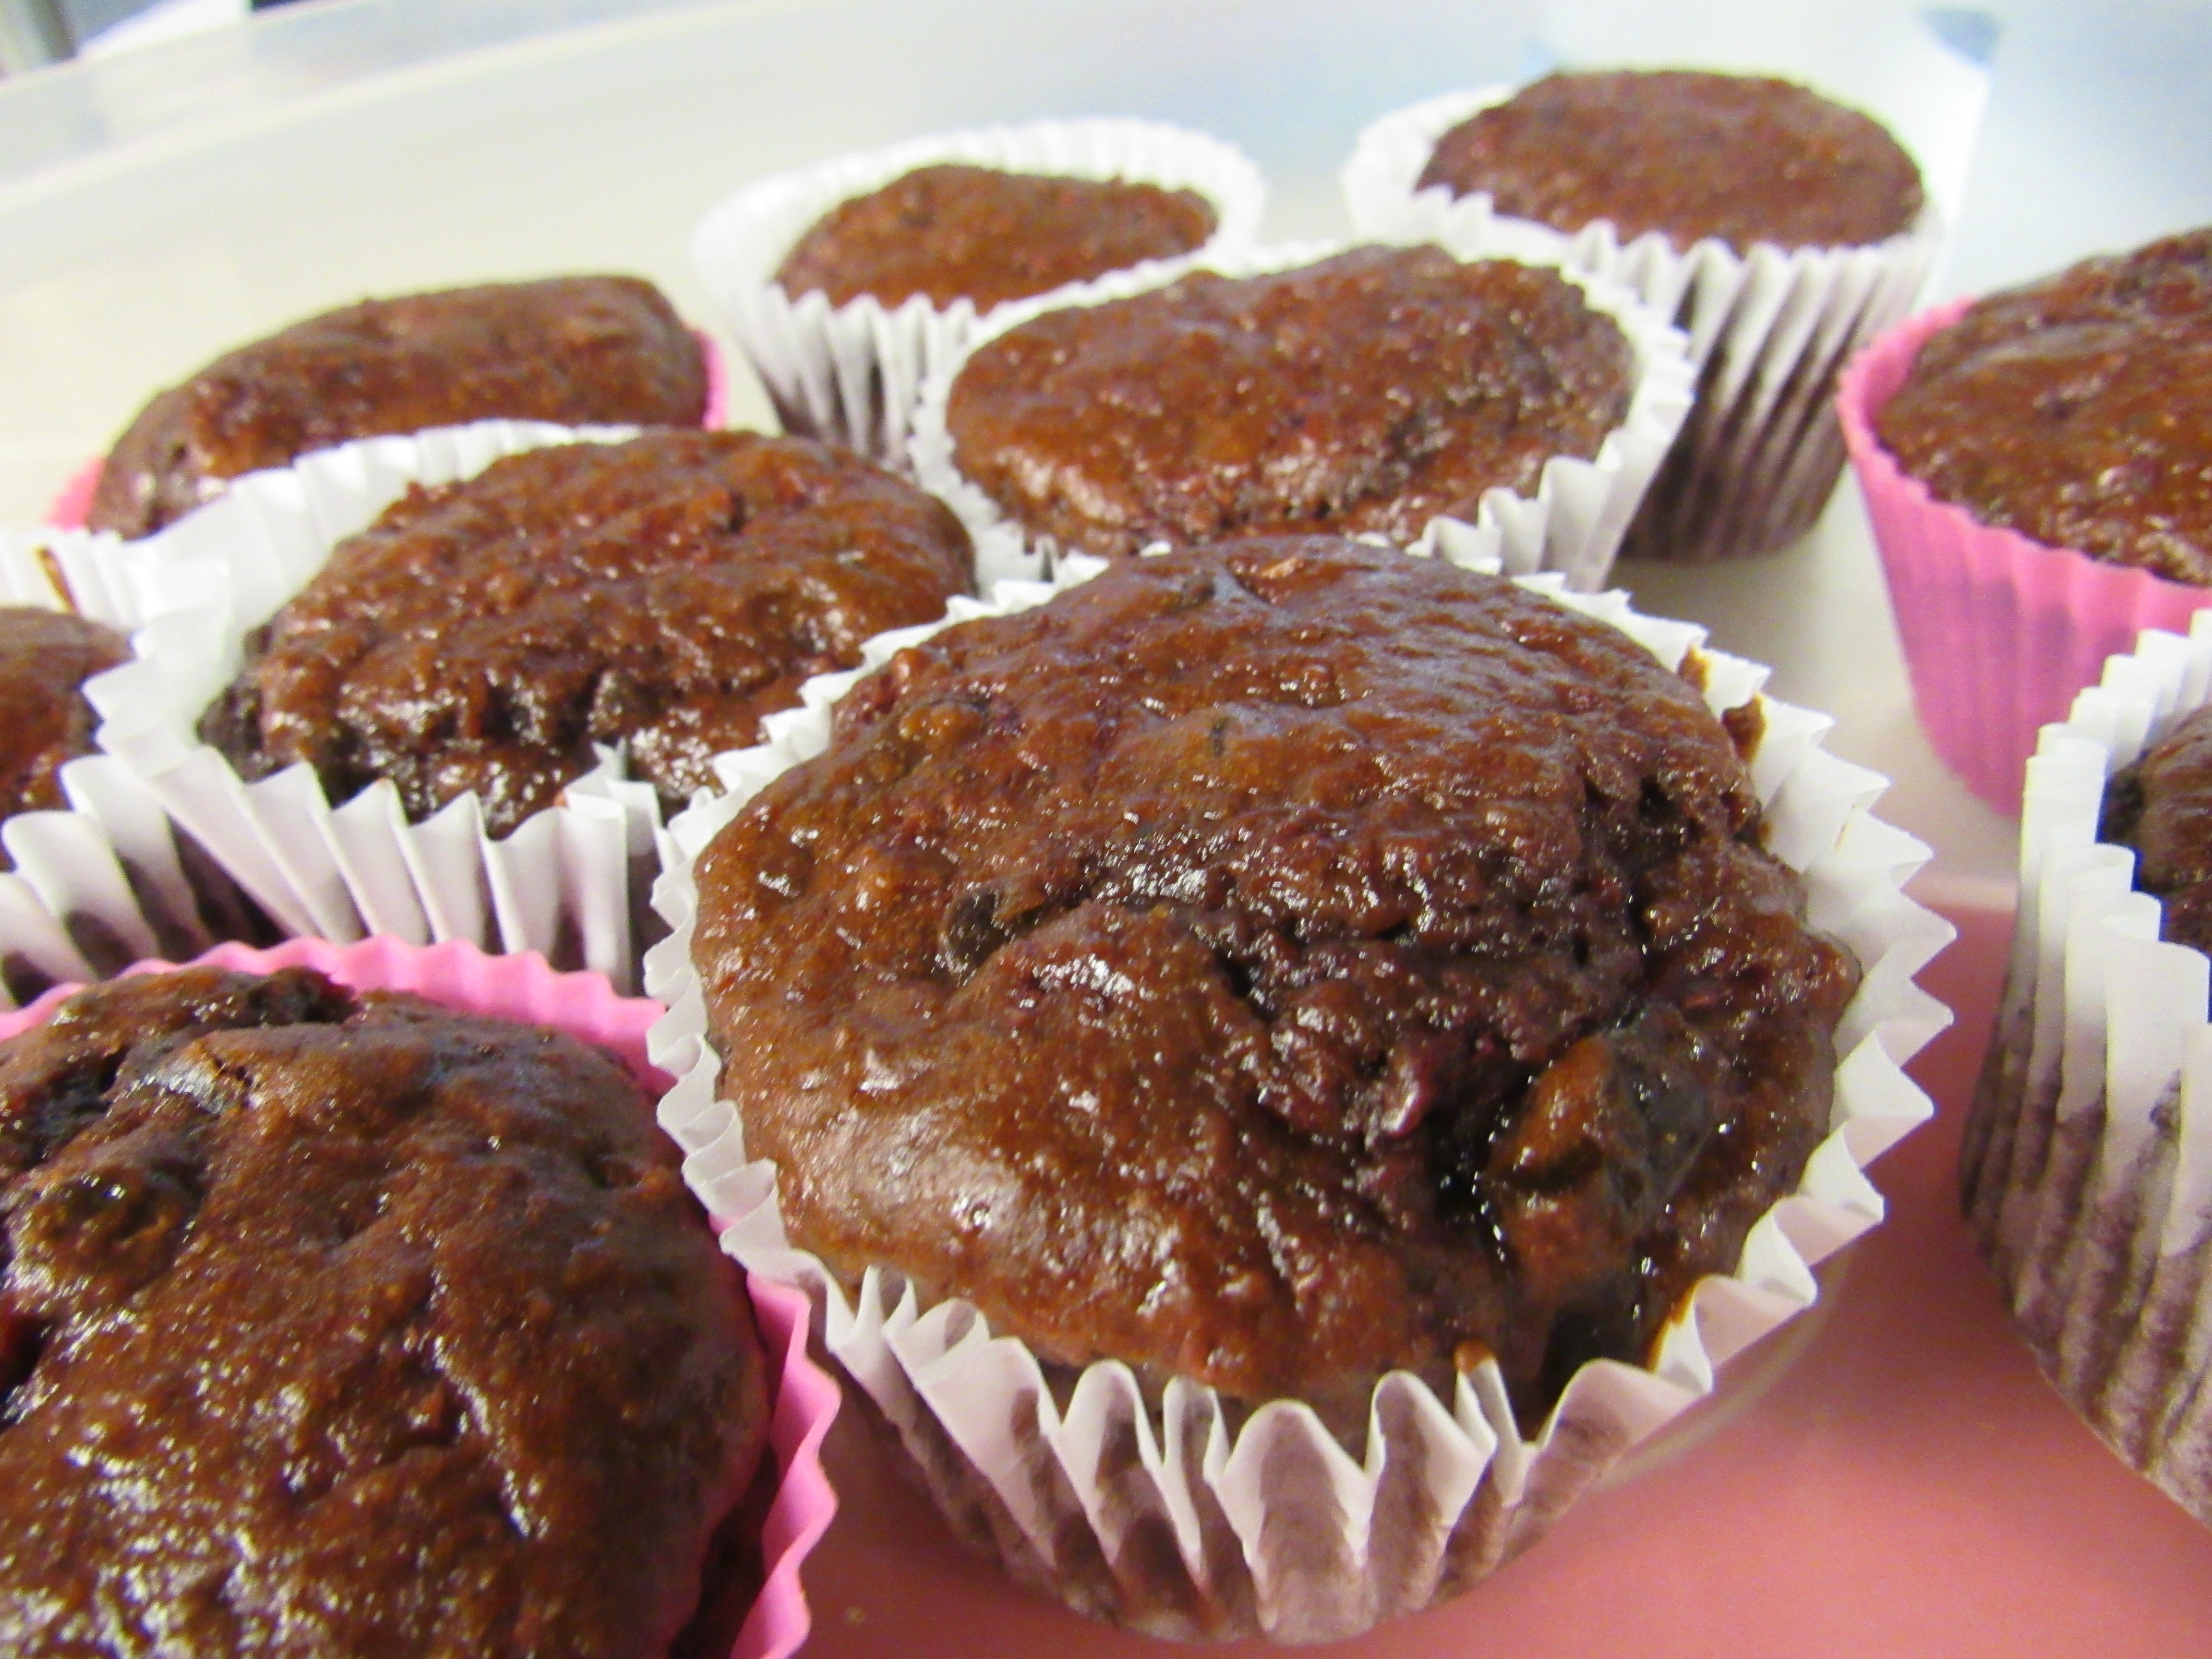 Heartbeet muffins pic